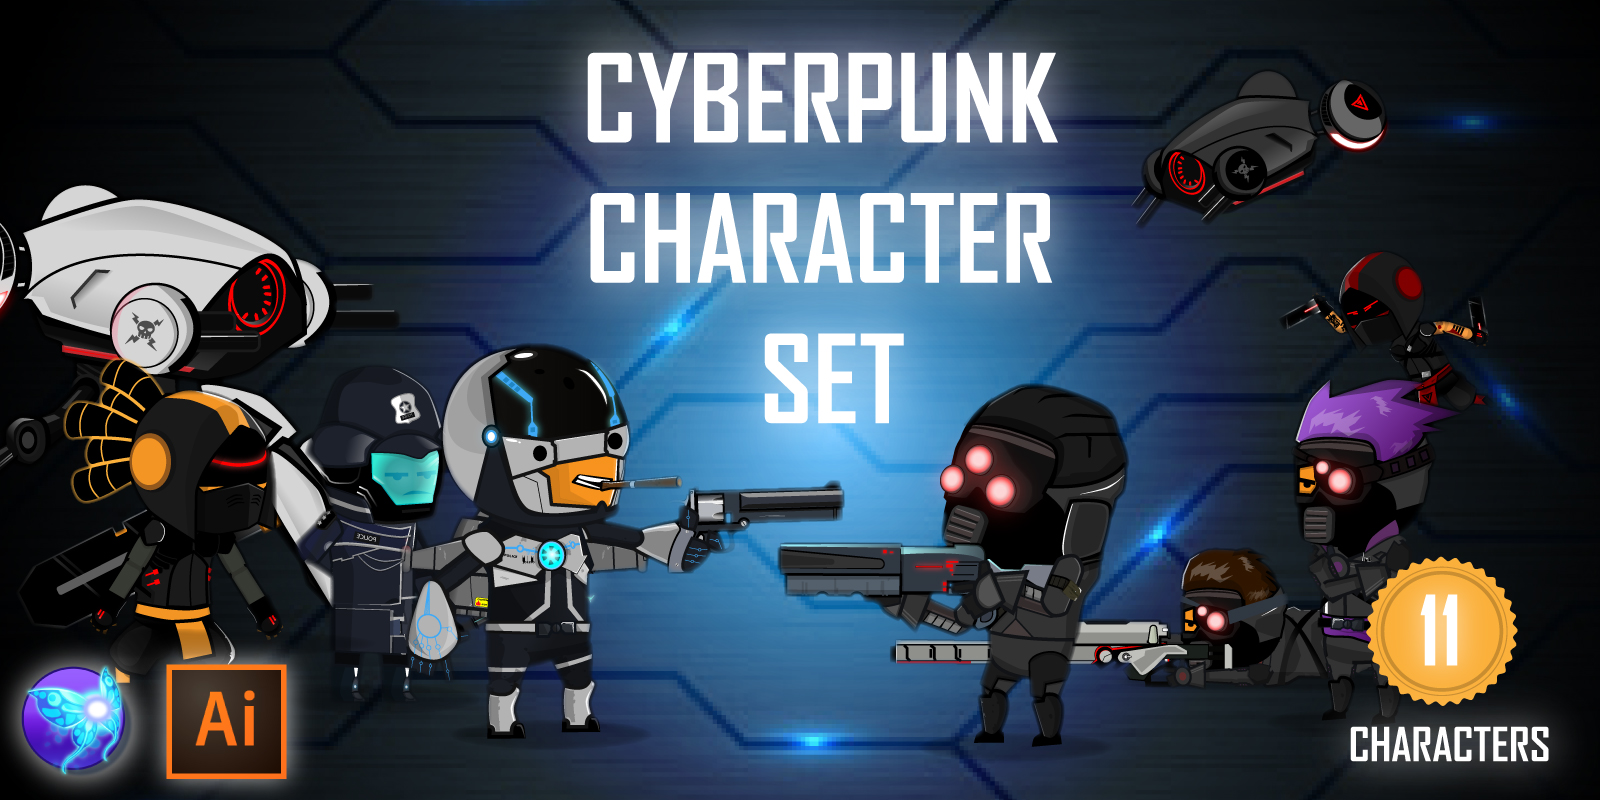 Free Extra Animations for Cyberpunk Characters 